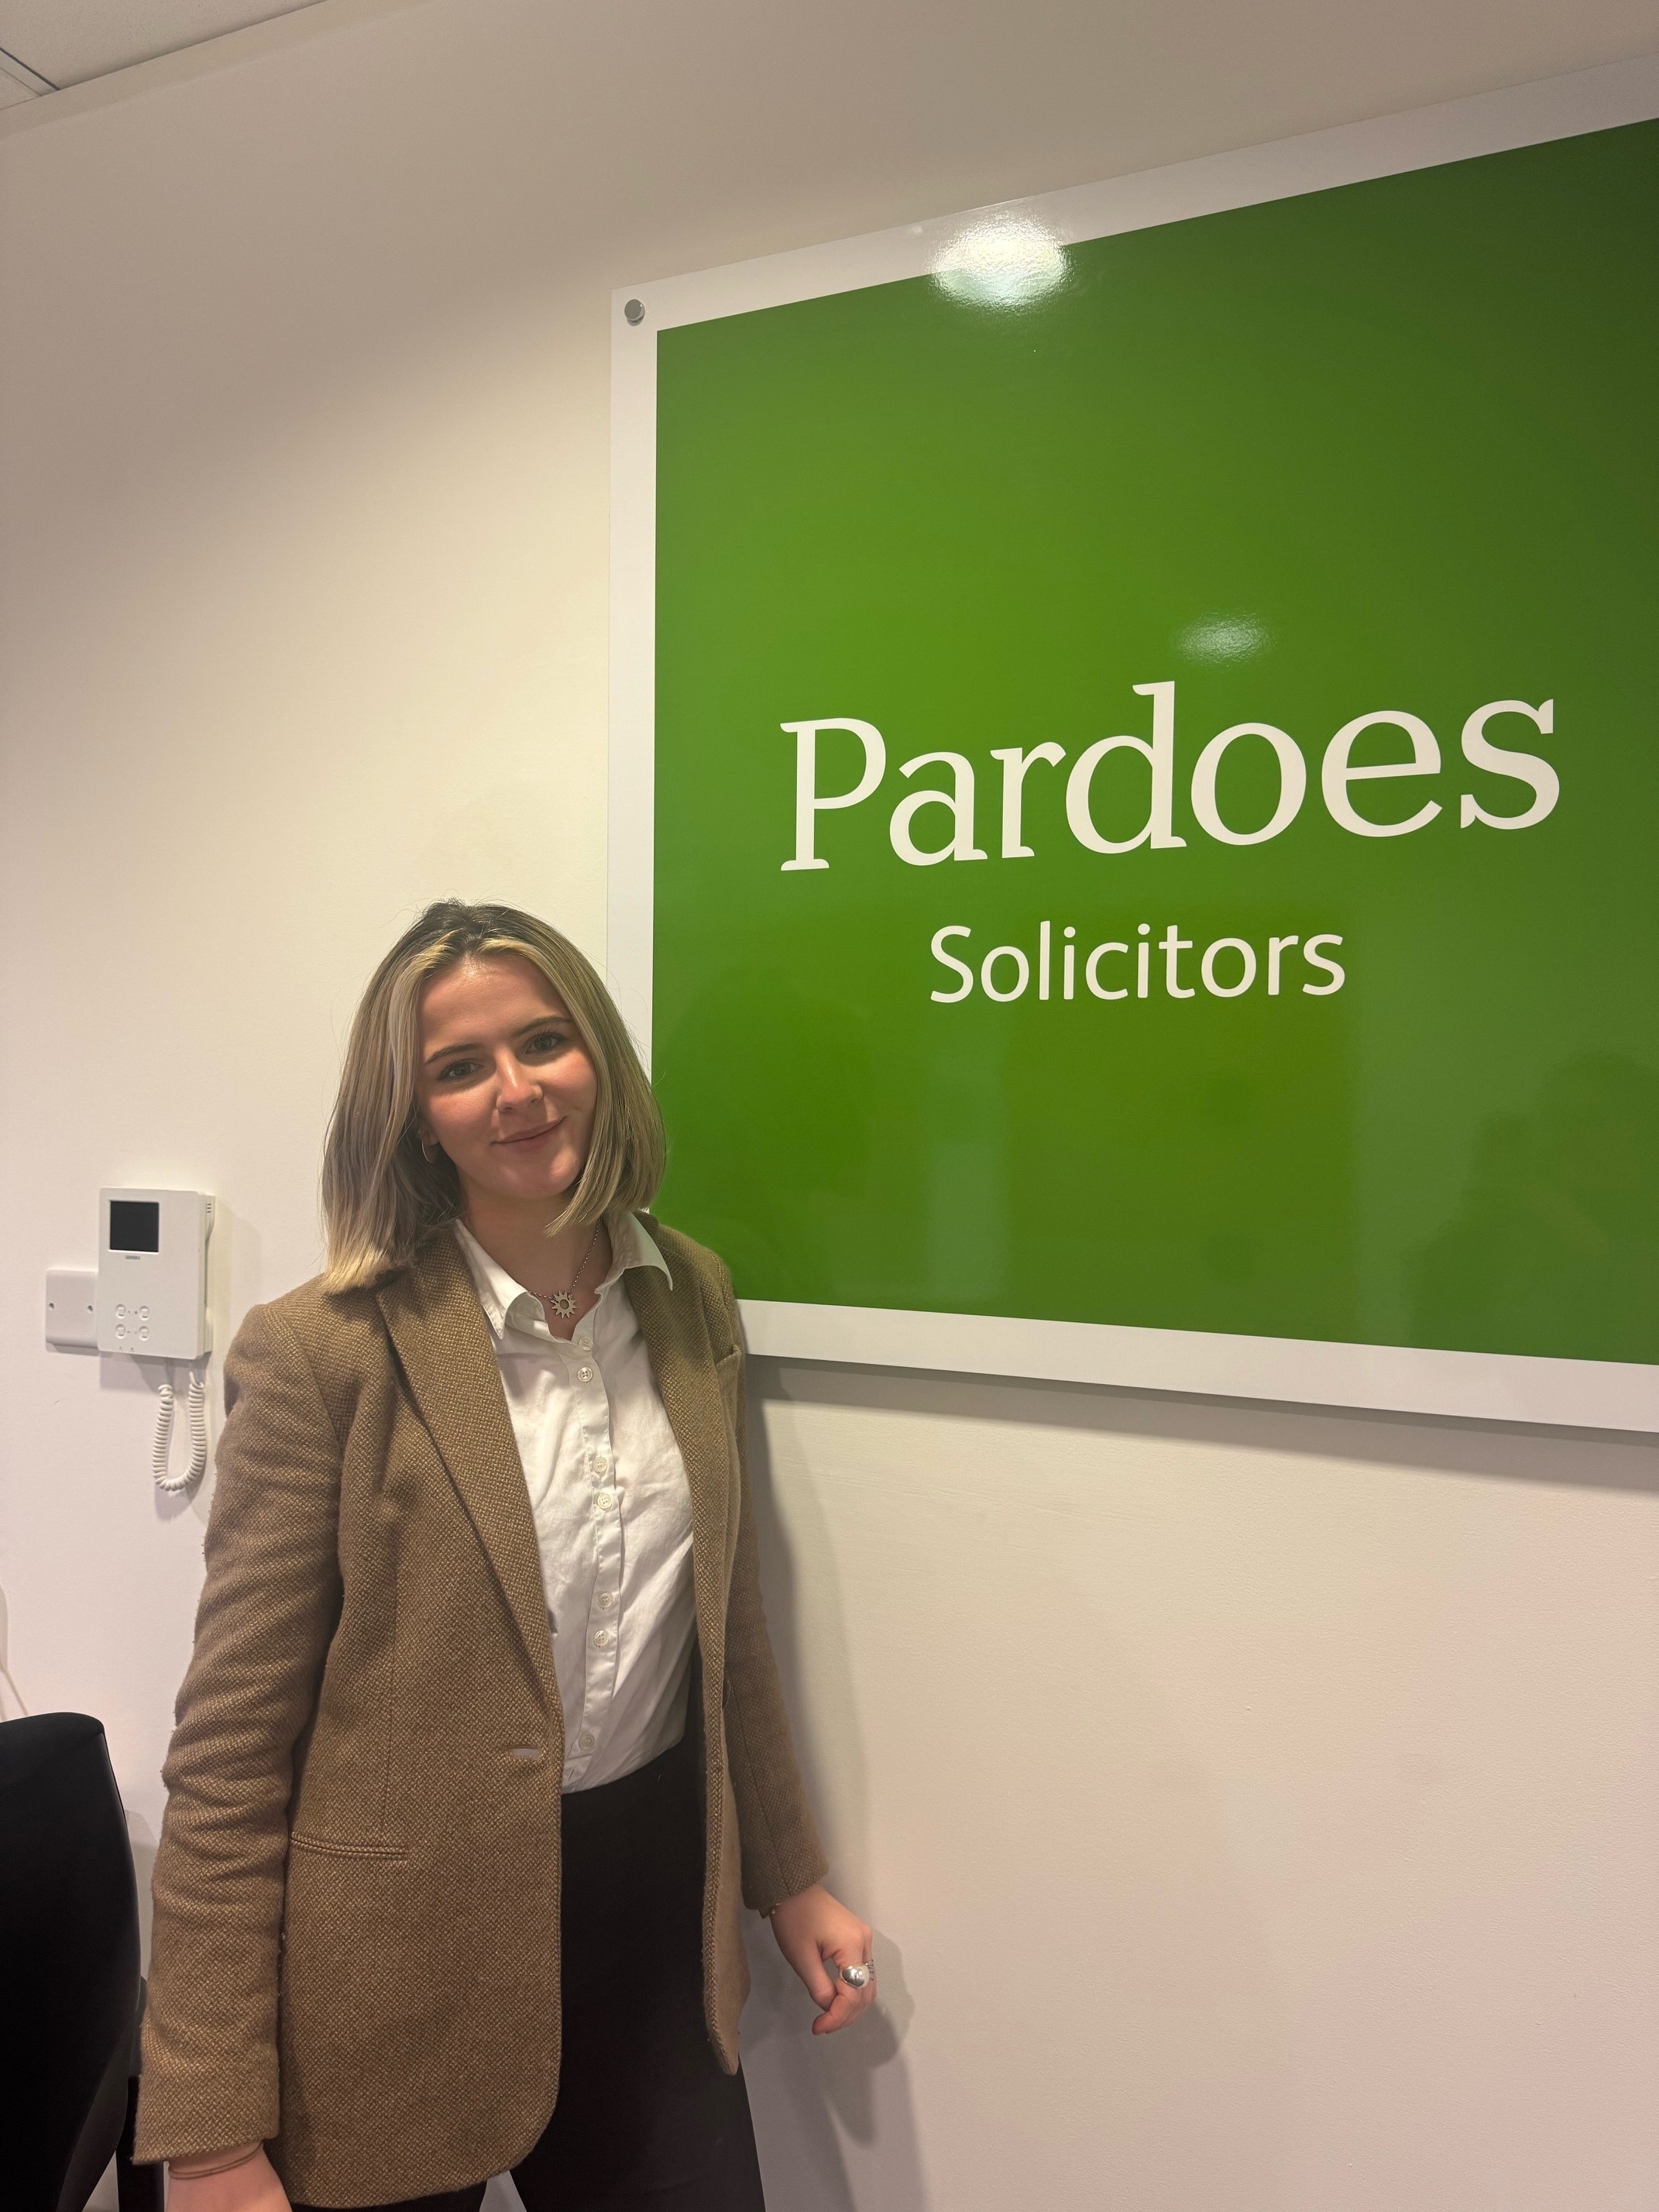 My two week work experience at Pardoes Solicitors..